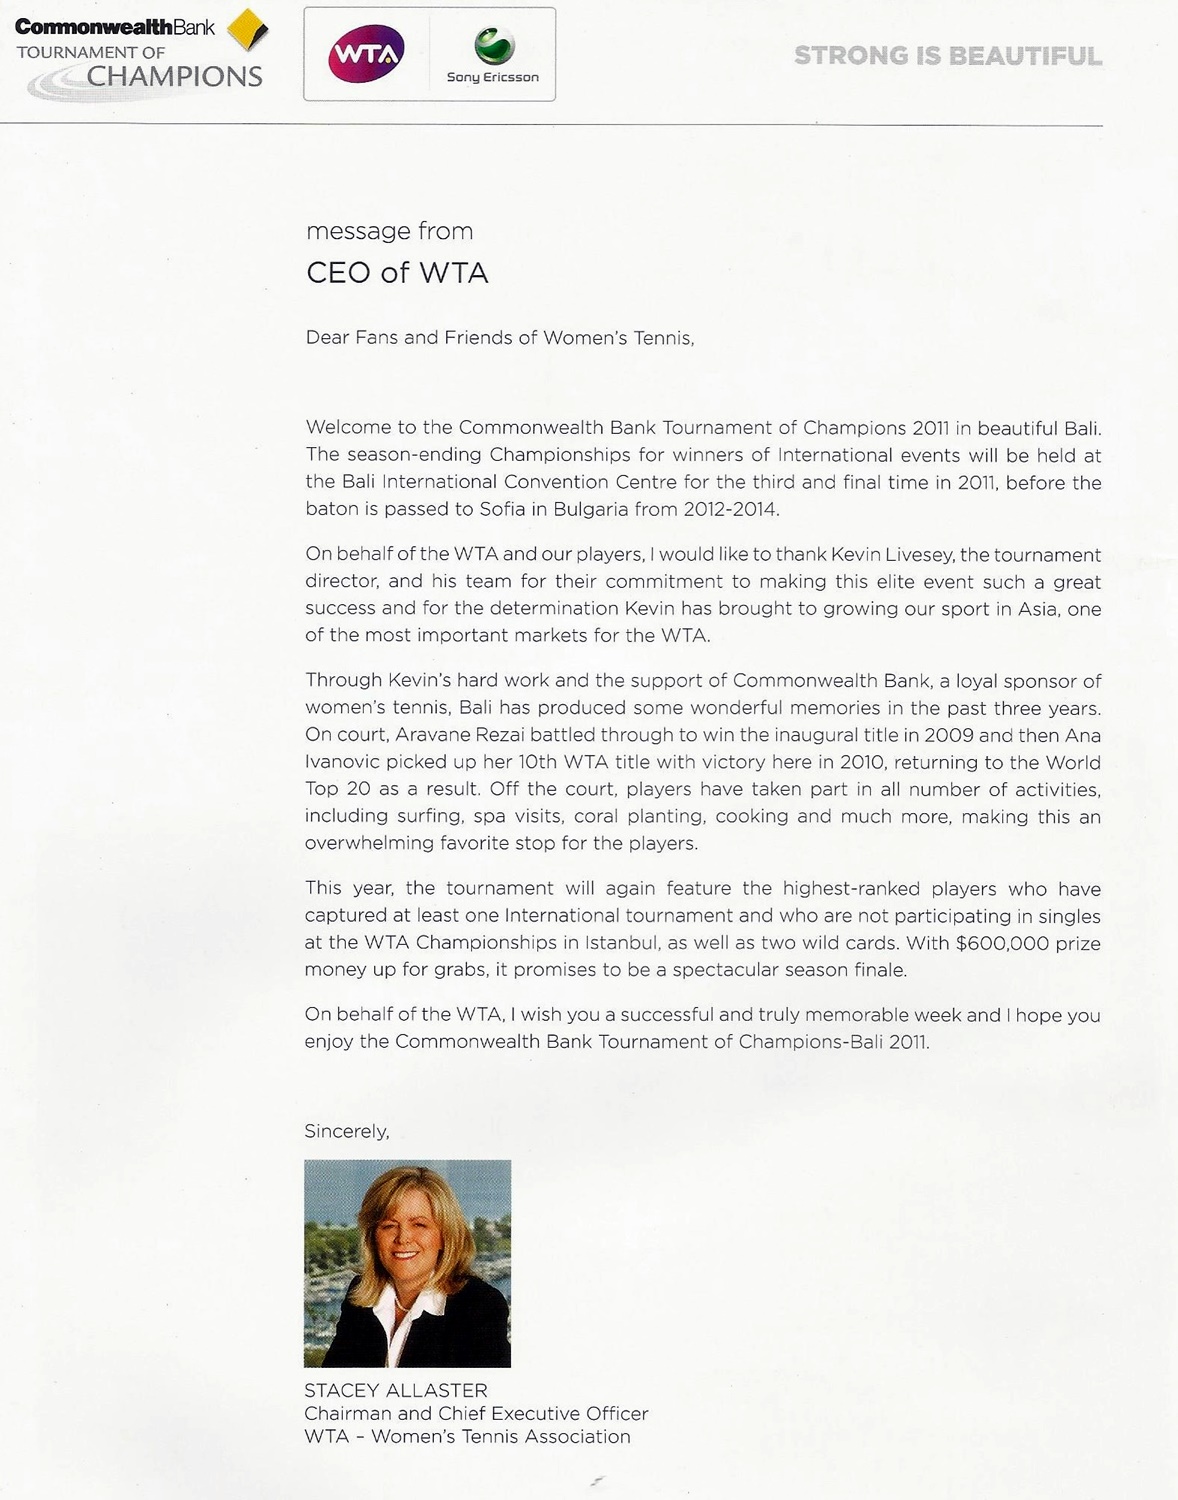 Message from Stacey Allastar - Chairman and CEO of WTA Tour